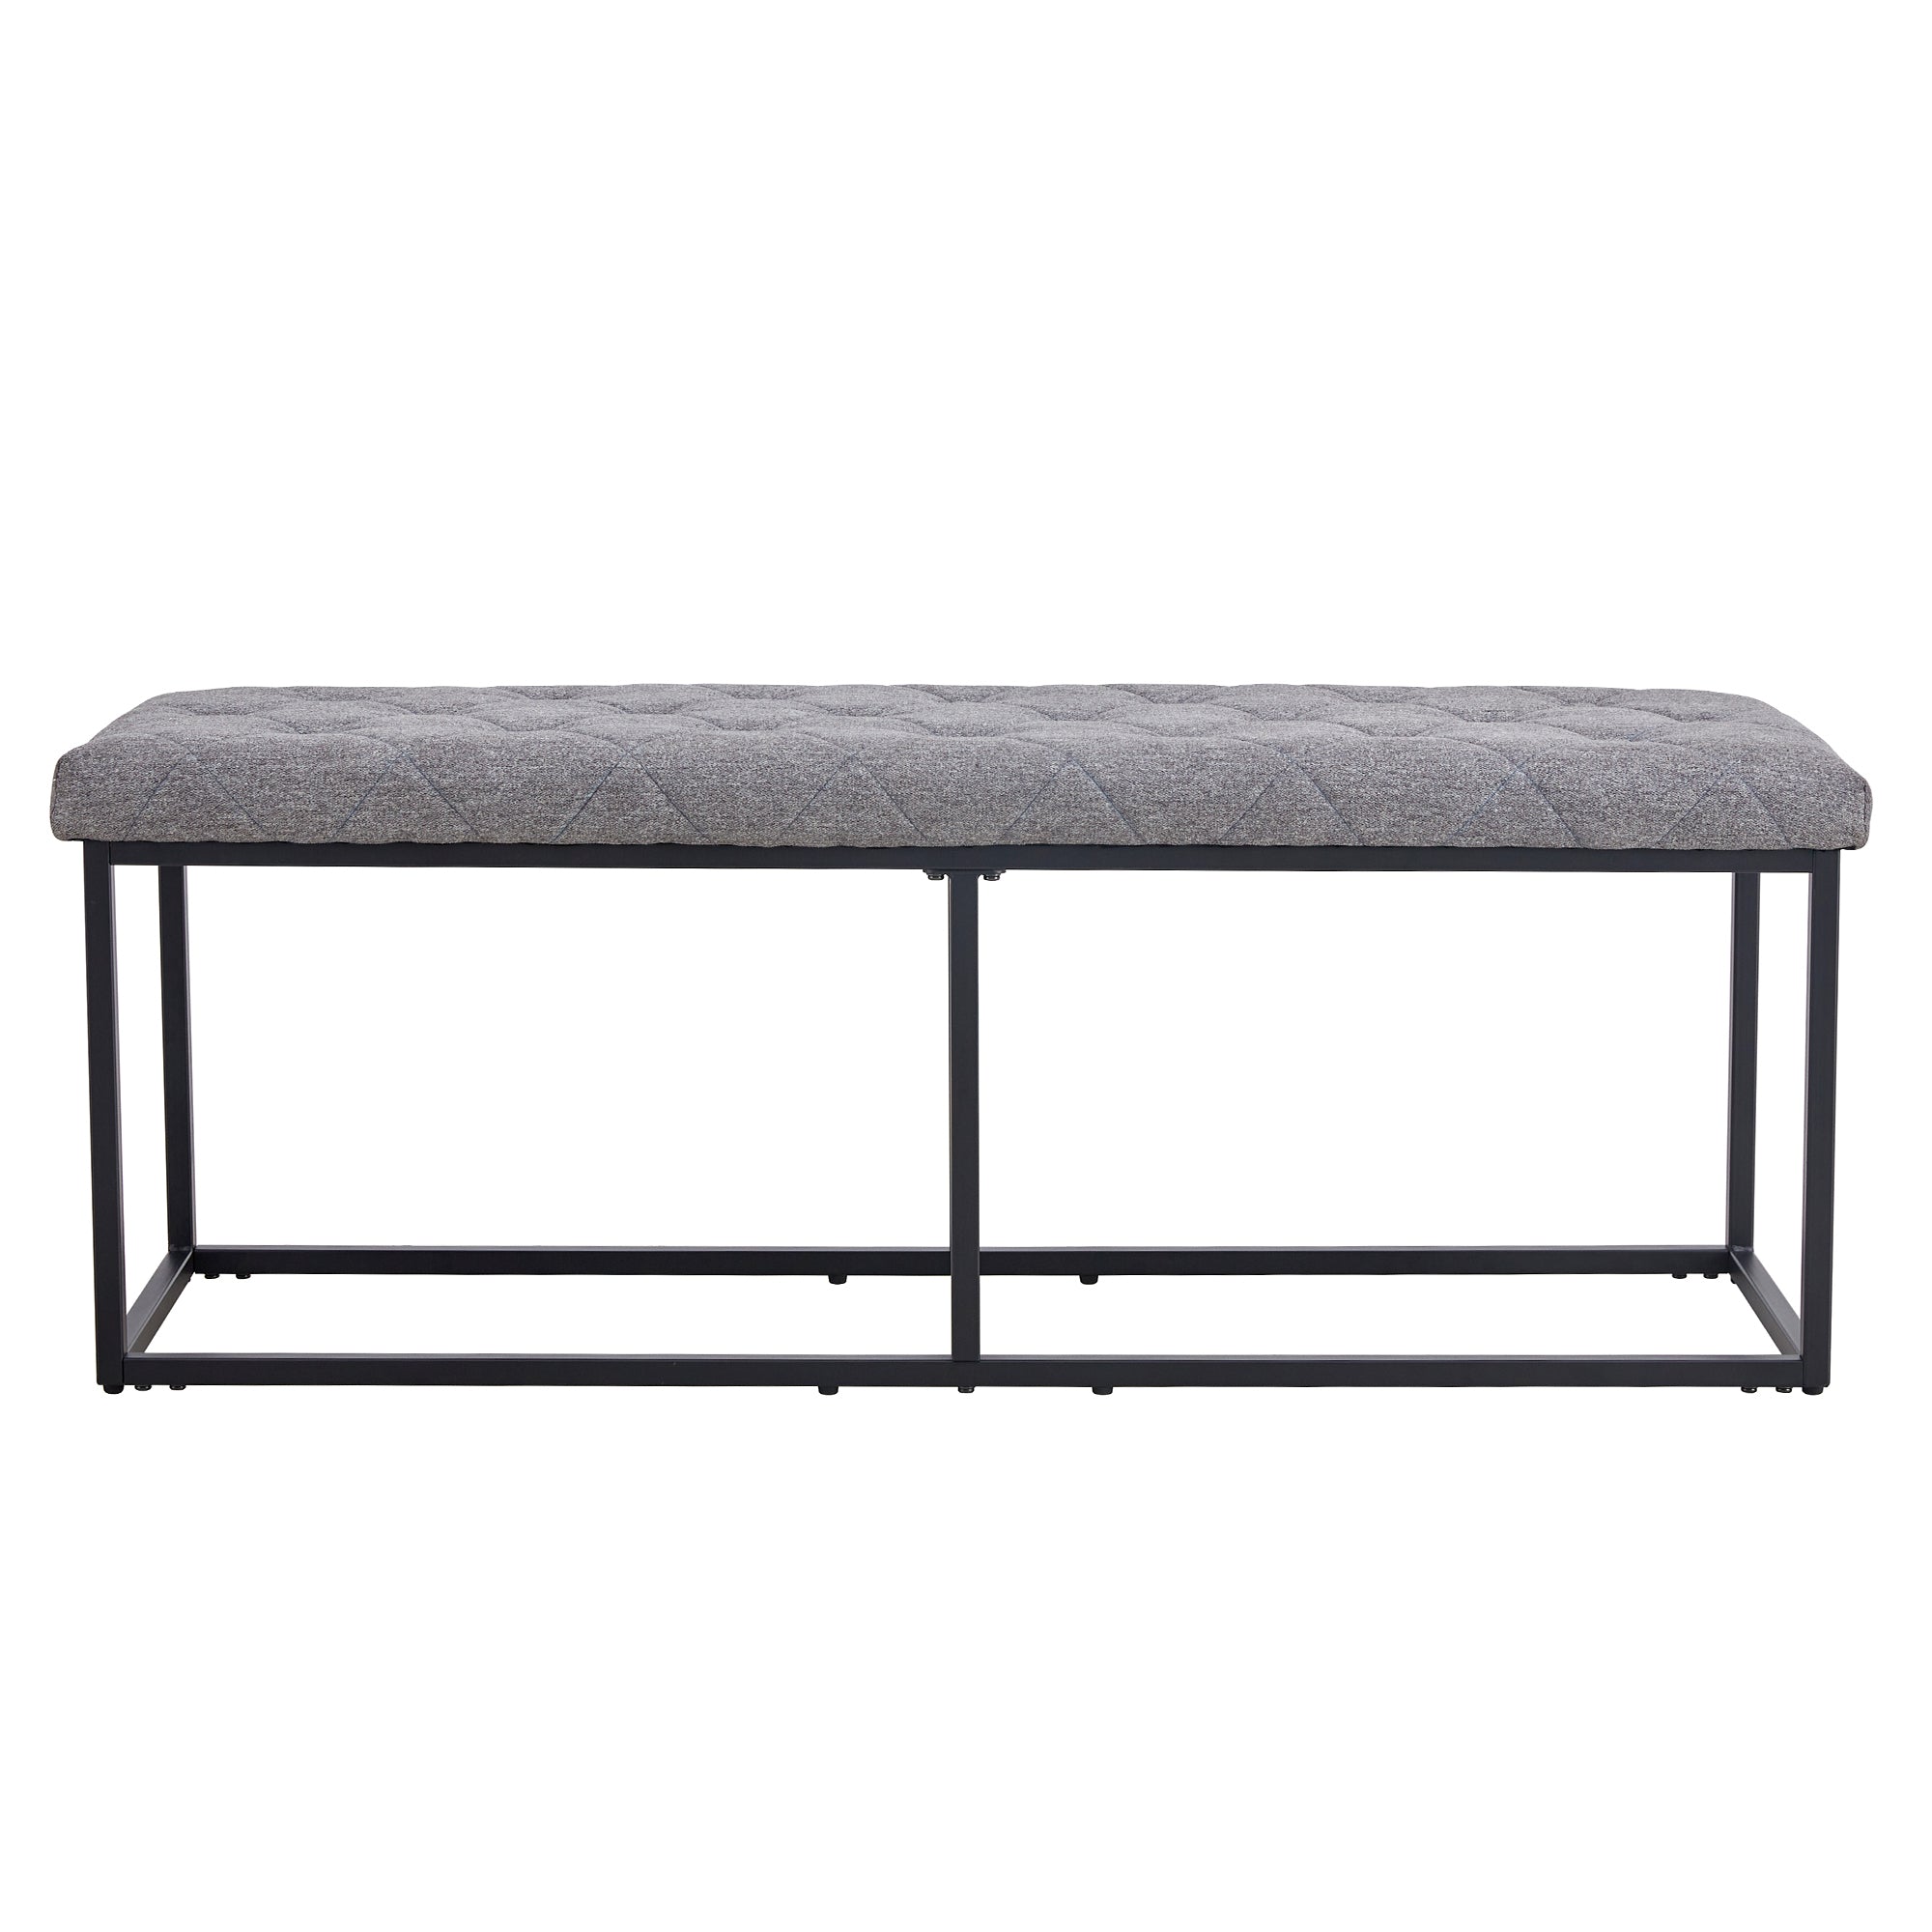 Tufted Extra Long Entryway Bench, 51" Bedroom